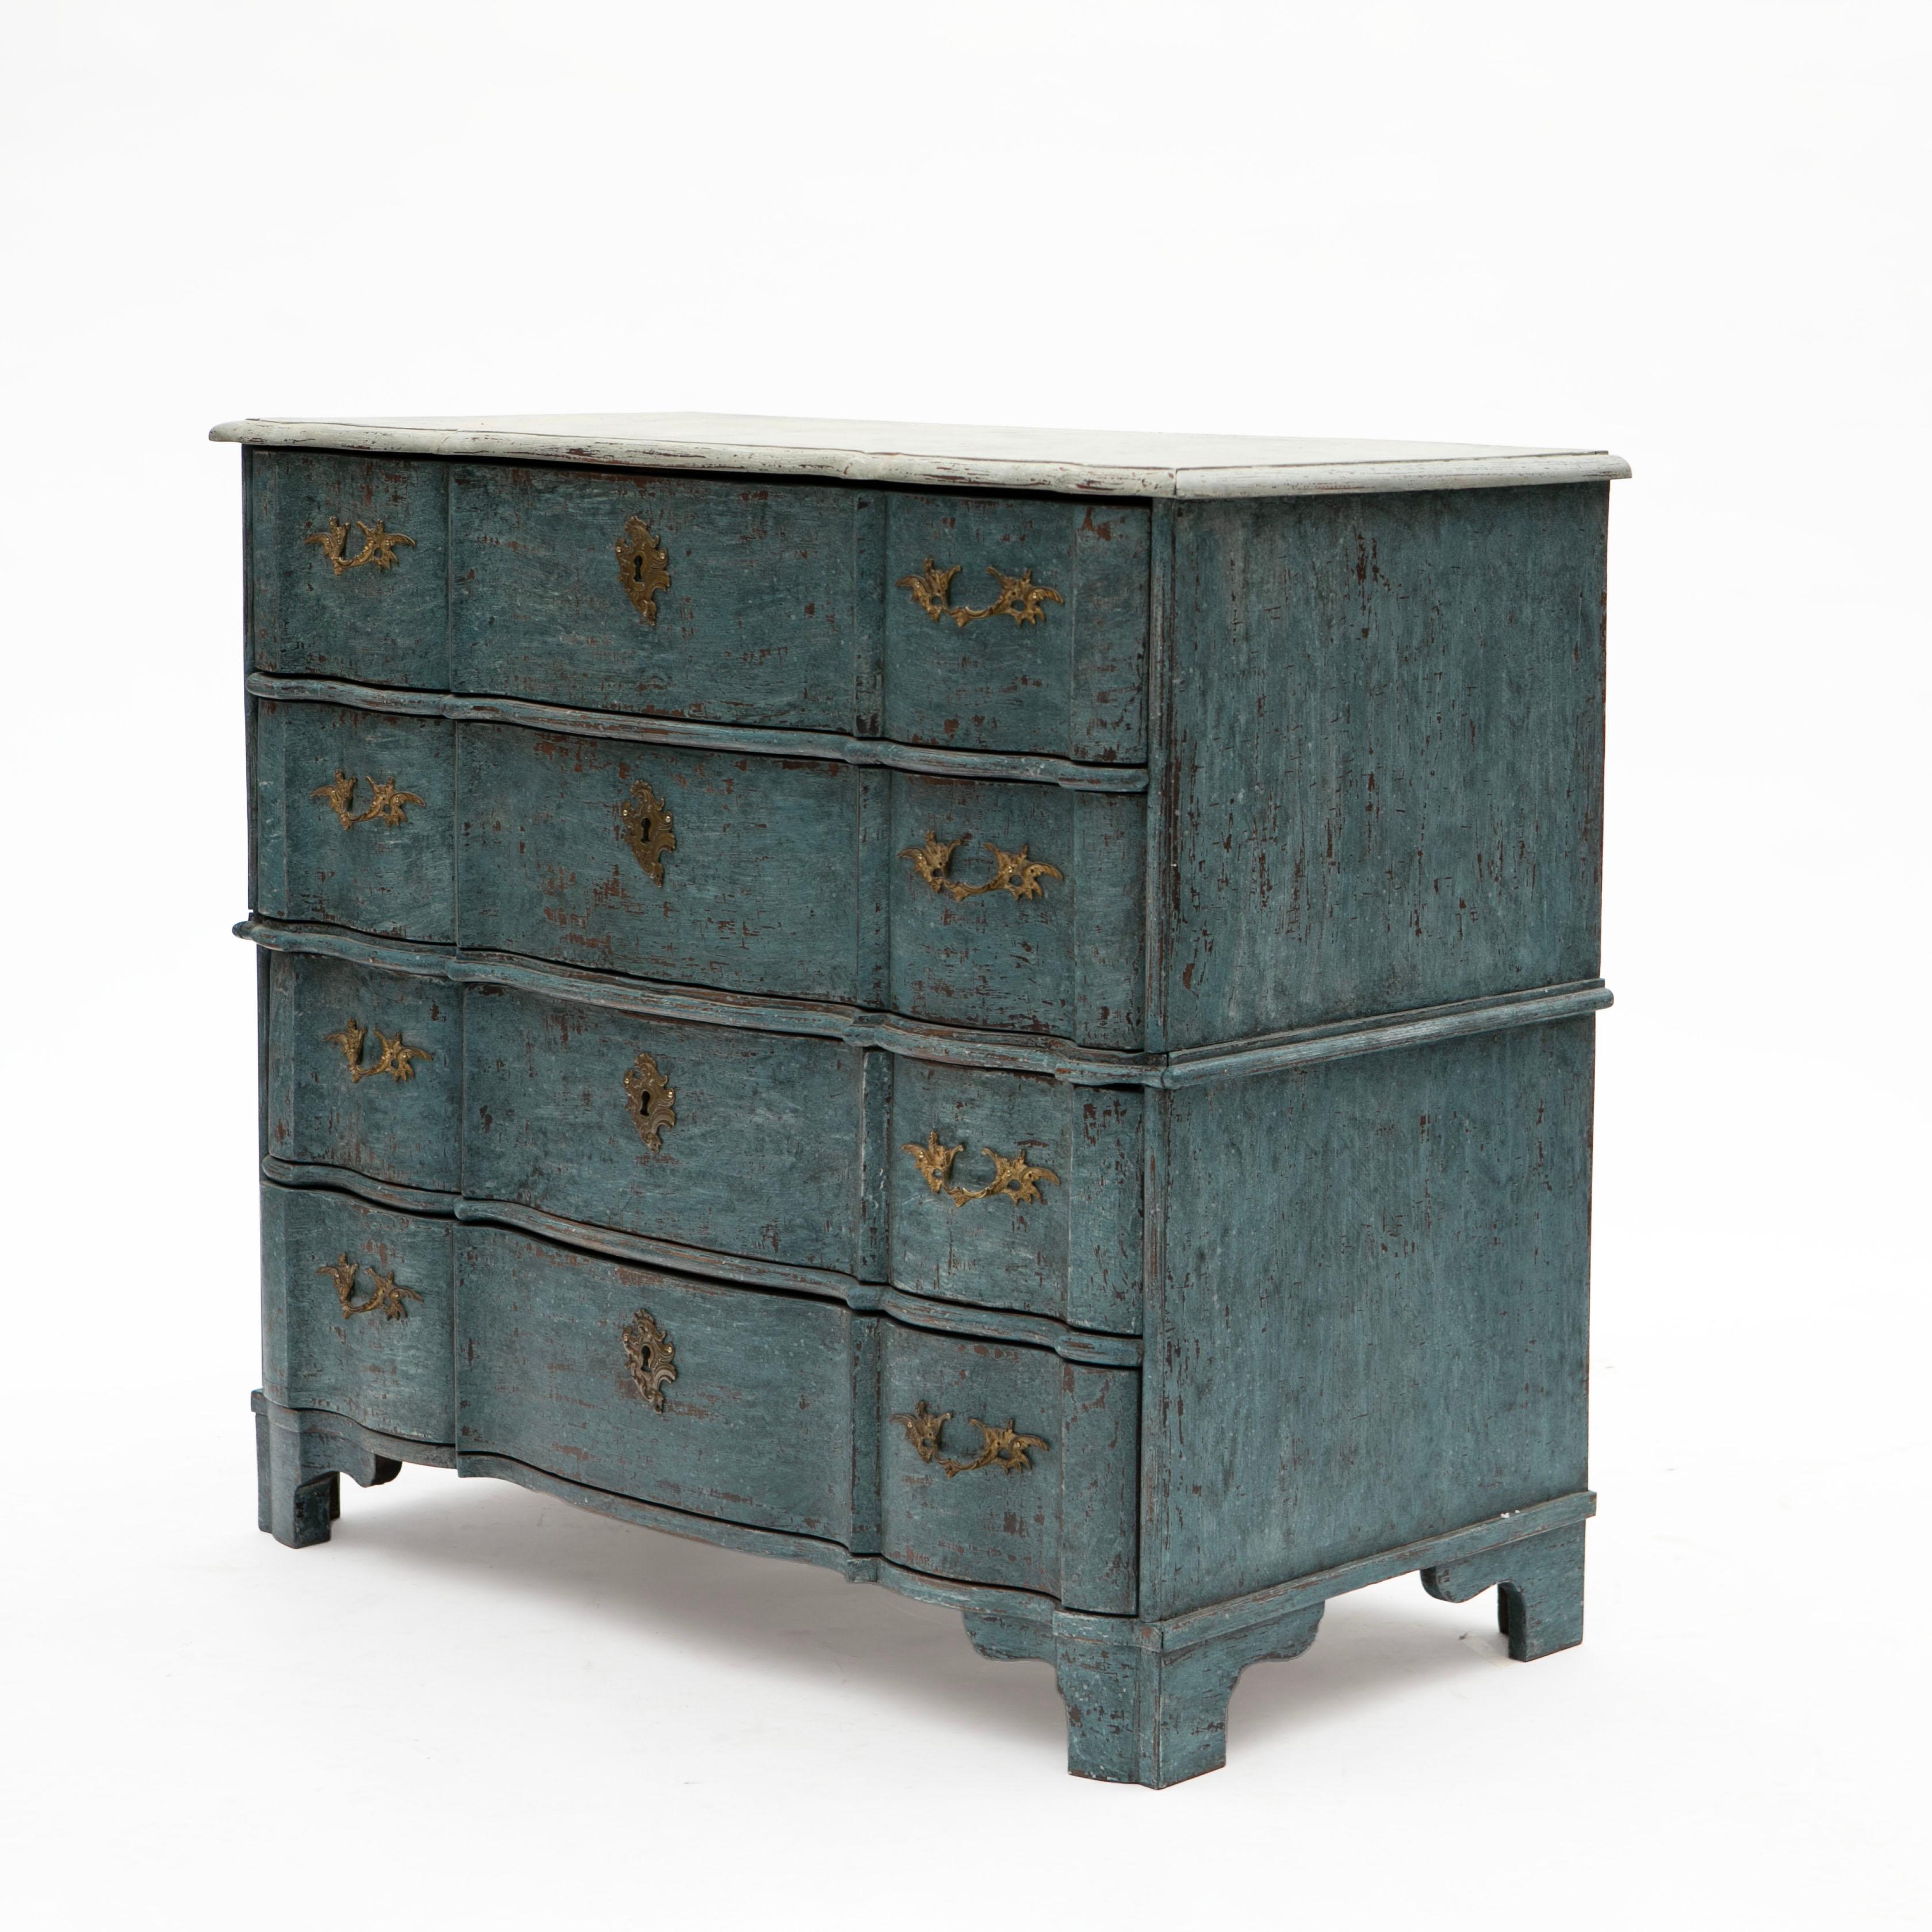 Danish 18th century baroque oak wood chest of drawers with serpentine front.
In 2 parts.
Features a rectangular grey painted top with serpentine front, sitting above four conforming drawers.

Later professional painted blue with wonderful and